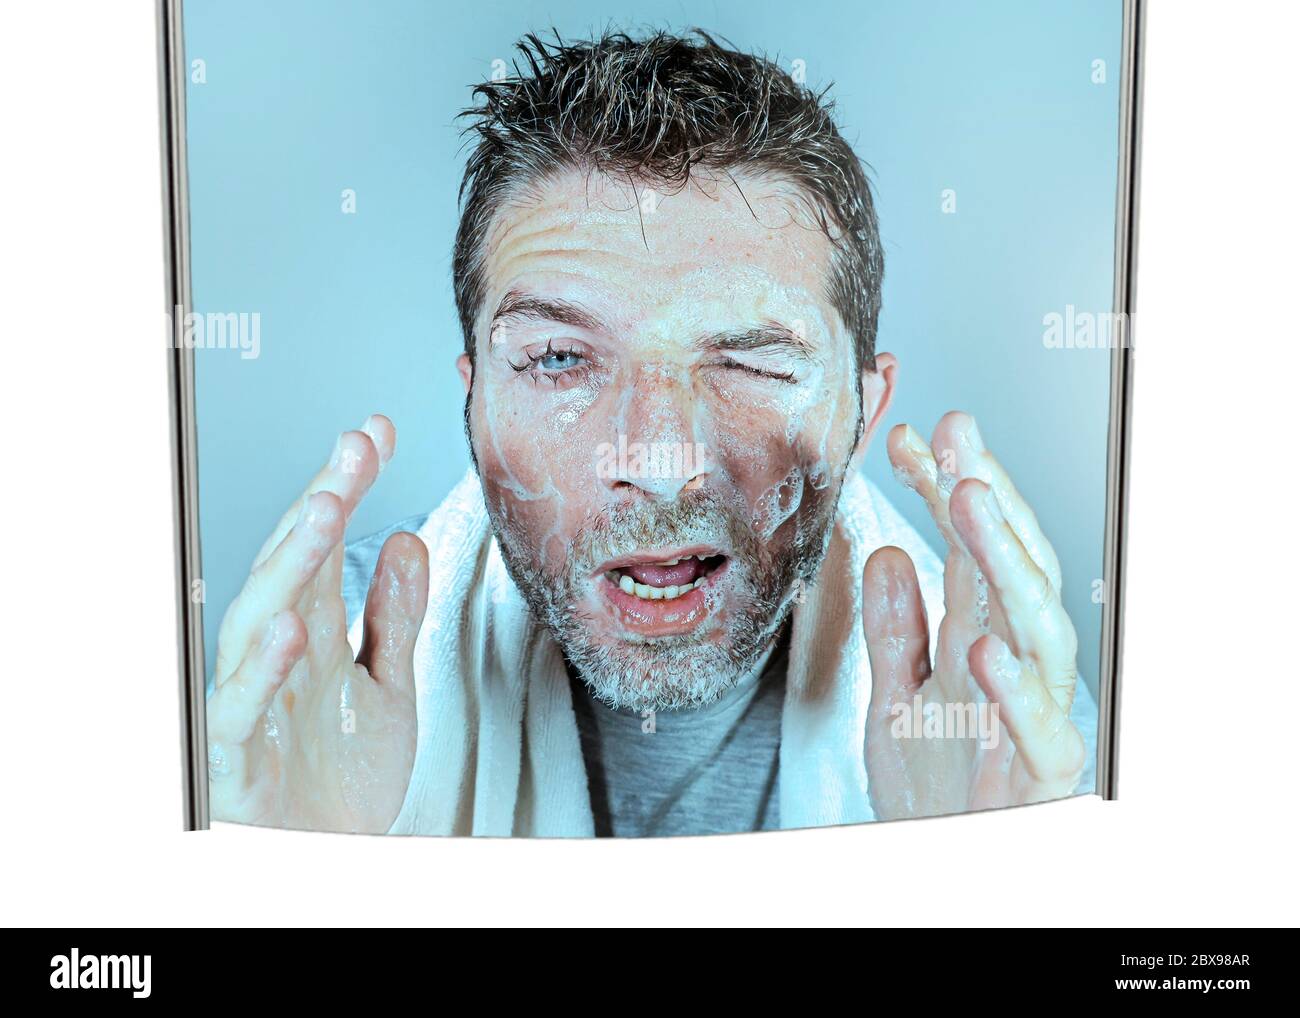 mirror reflection portrait of young attractive and funny man washing face with soap with itchy eyes and messy face expression applying beauty facial s Stock Photo